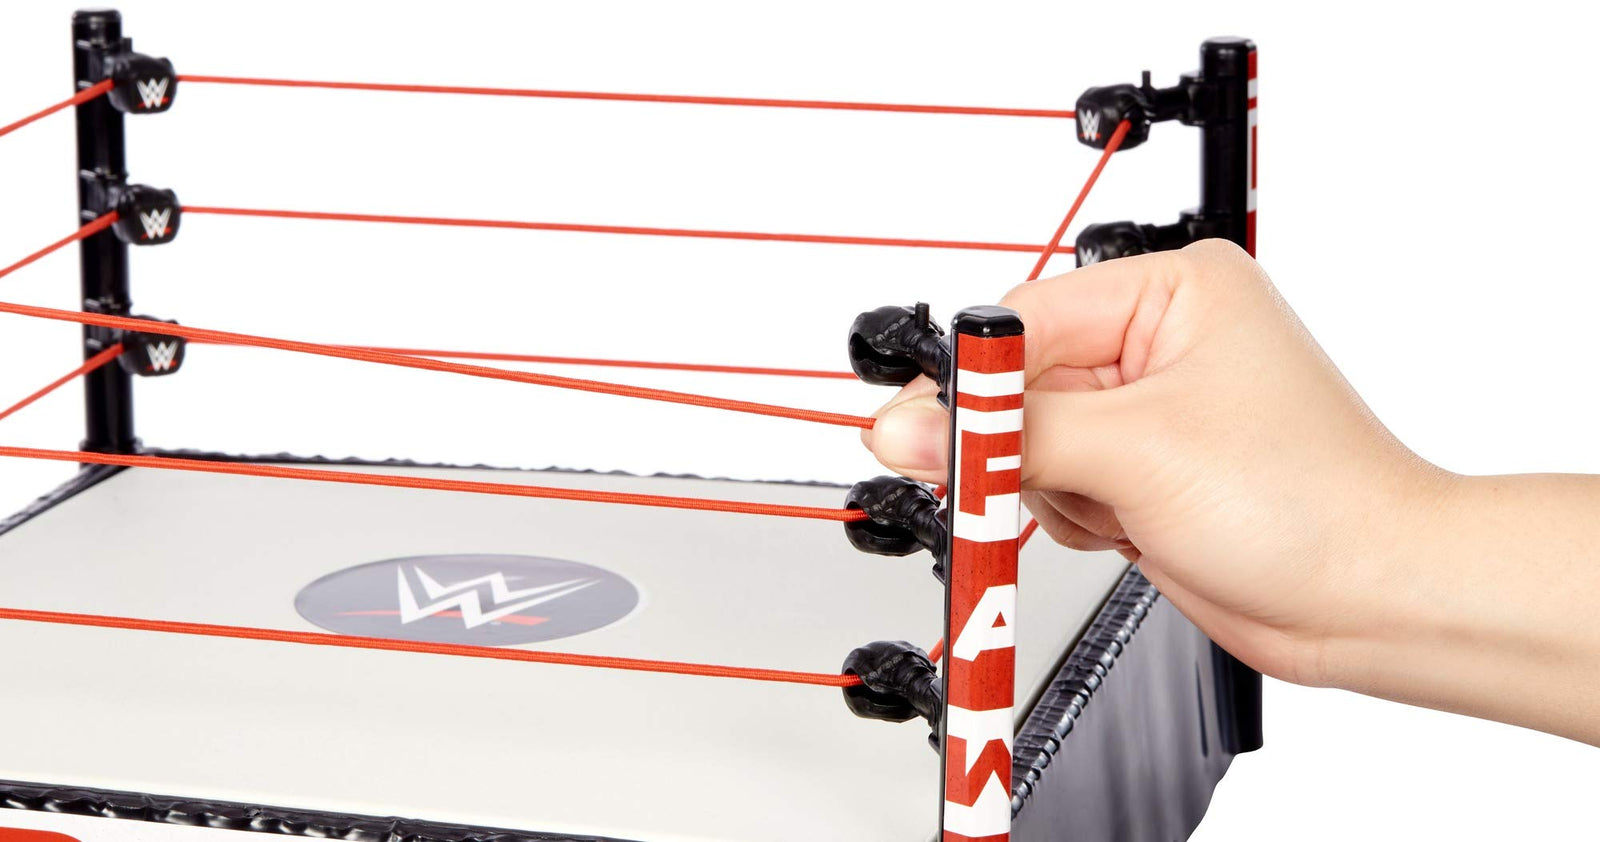 WWE Superstar 14-inch Ring with Authentic Logo, Flexible Ropes & Spring-loaded Mat for Bouncing Action  [Amazon Exclusive]